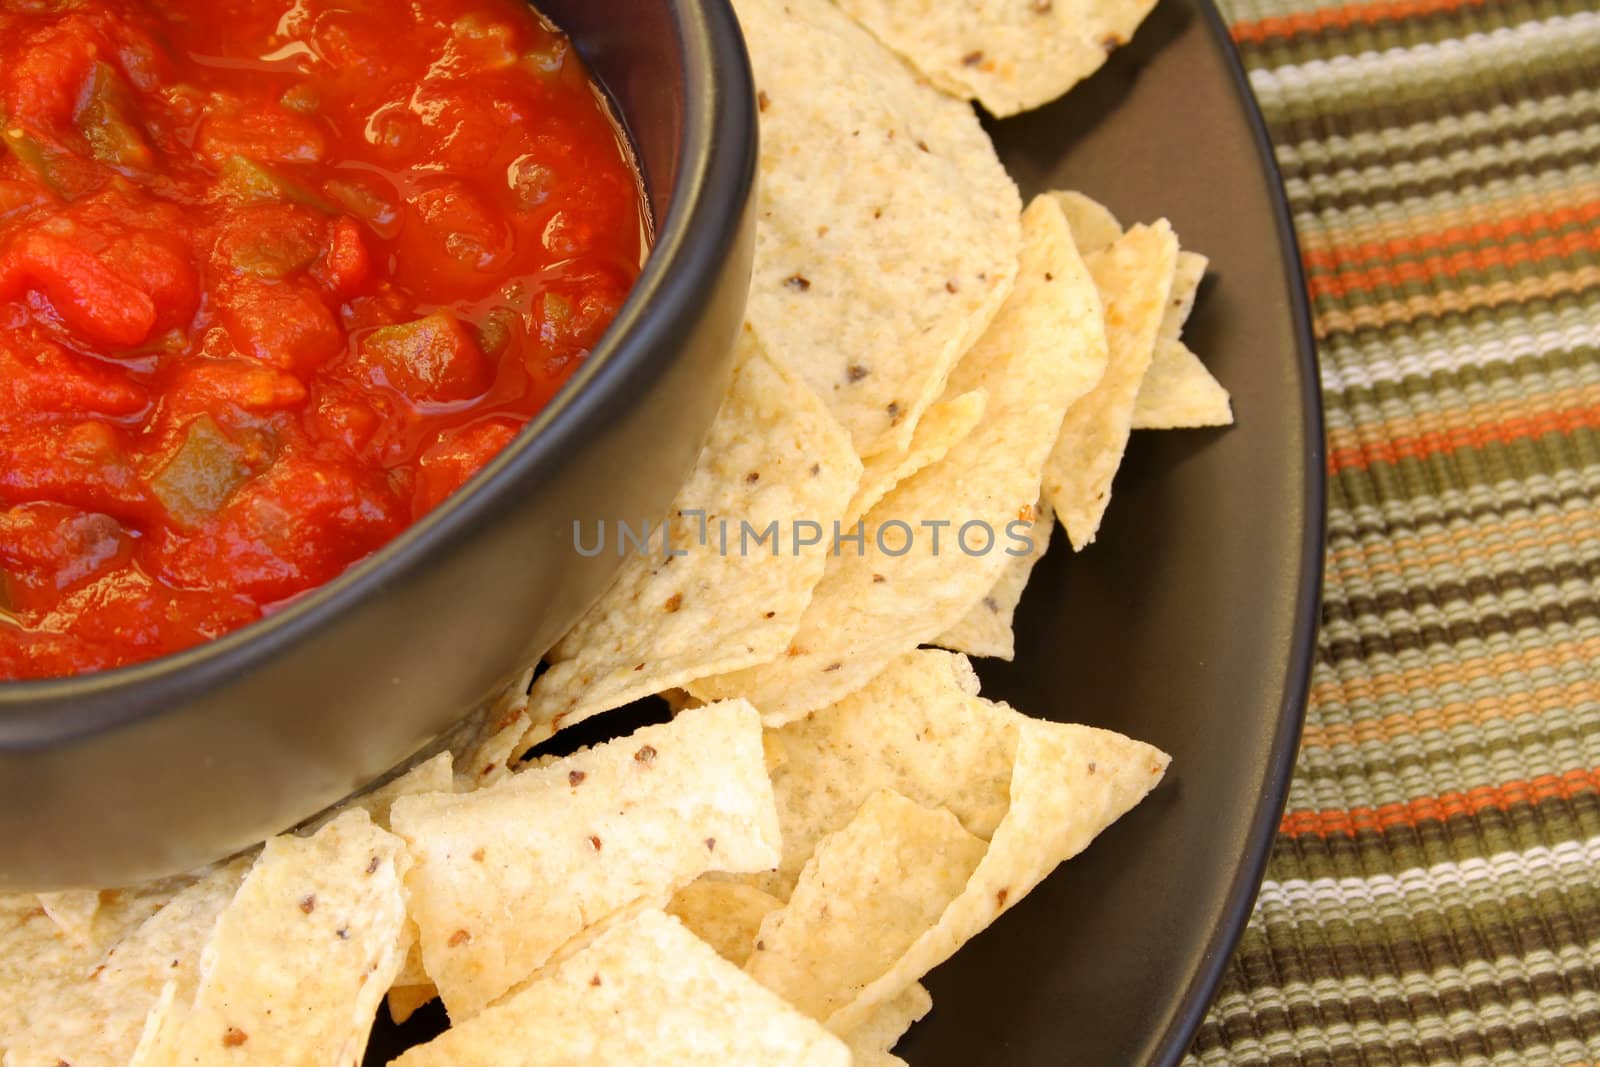 Salsa and chips

